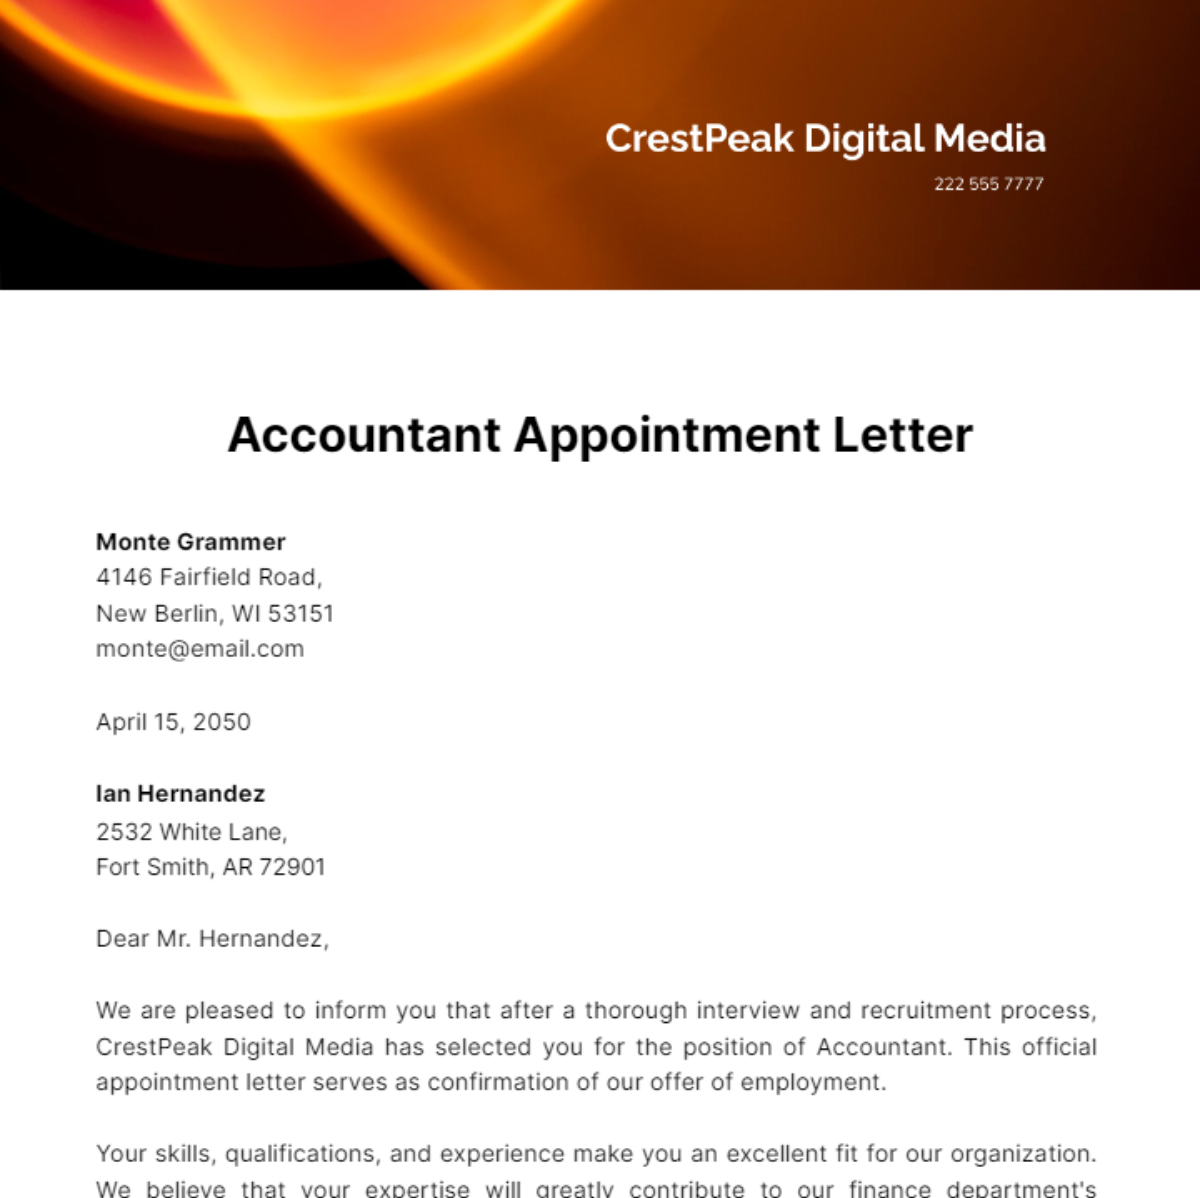 Accountant Appointment Letter Template